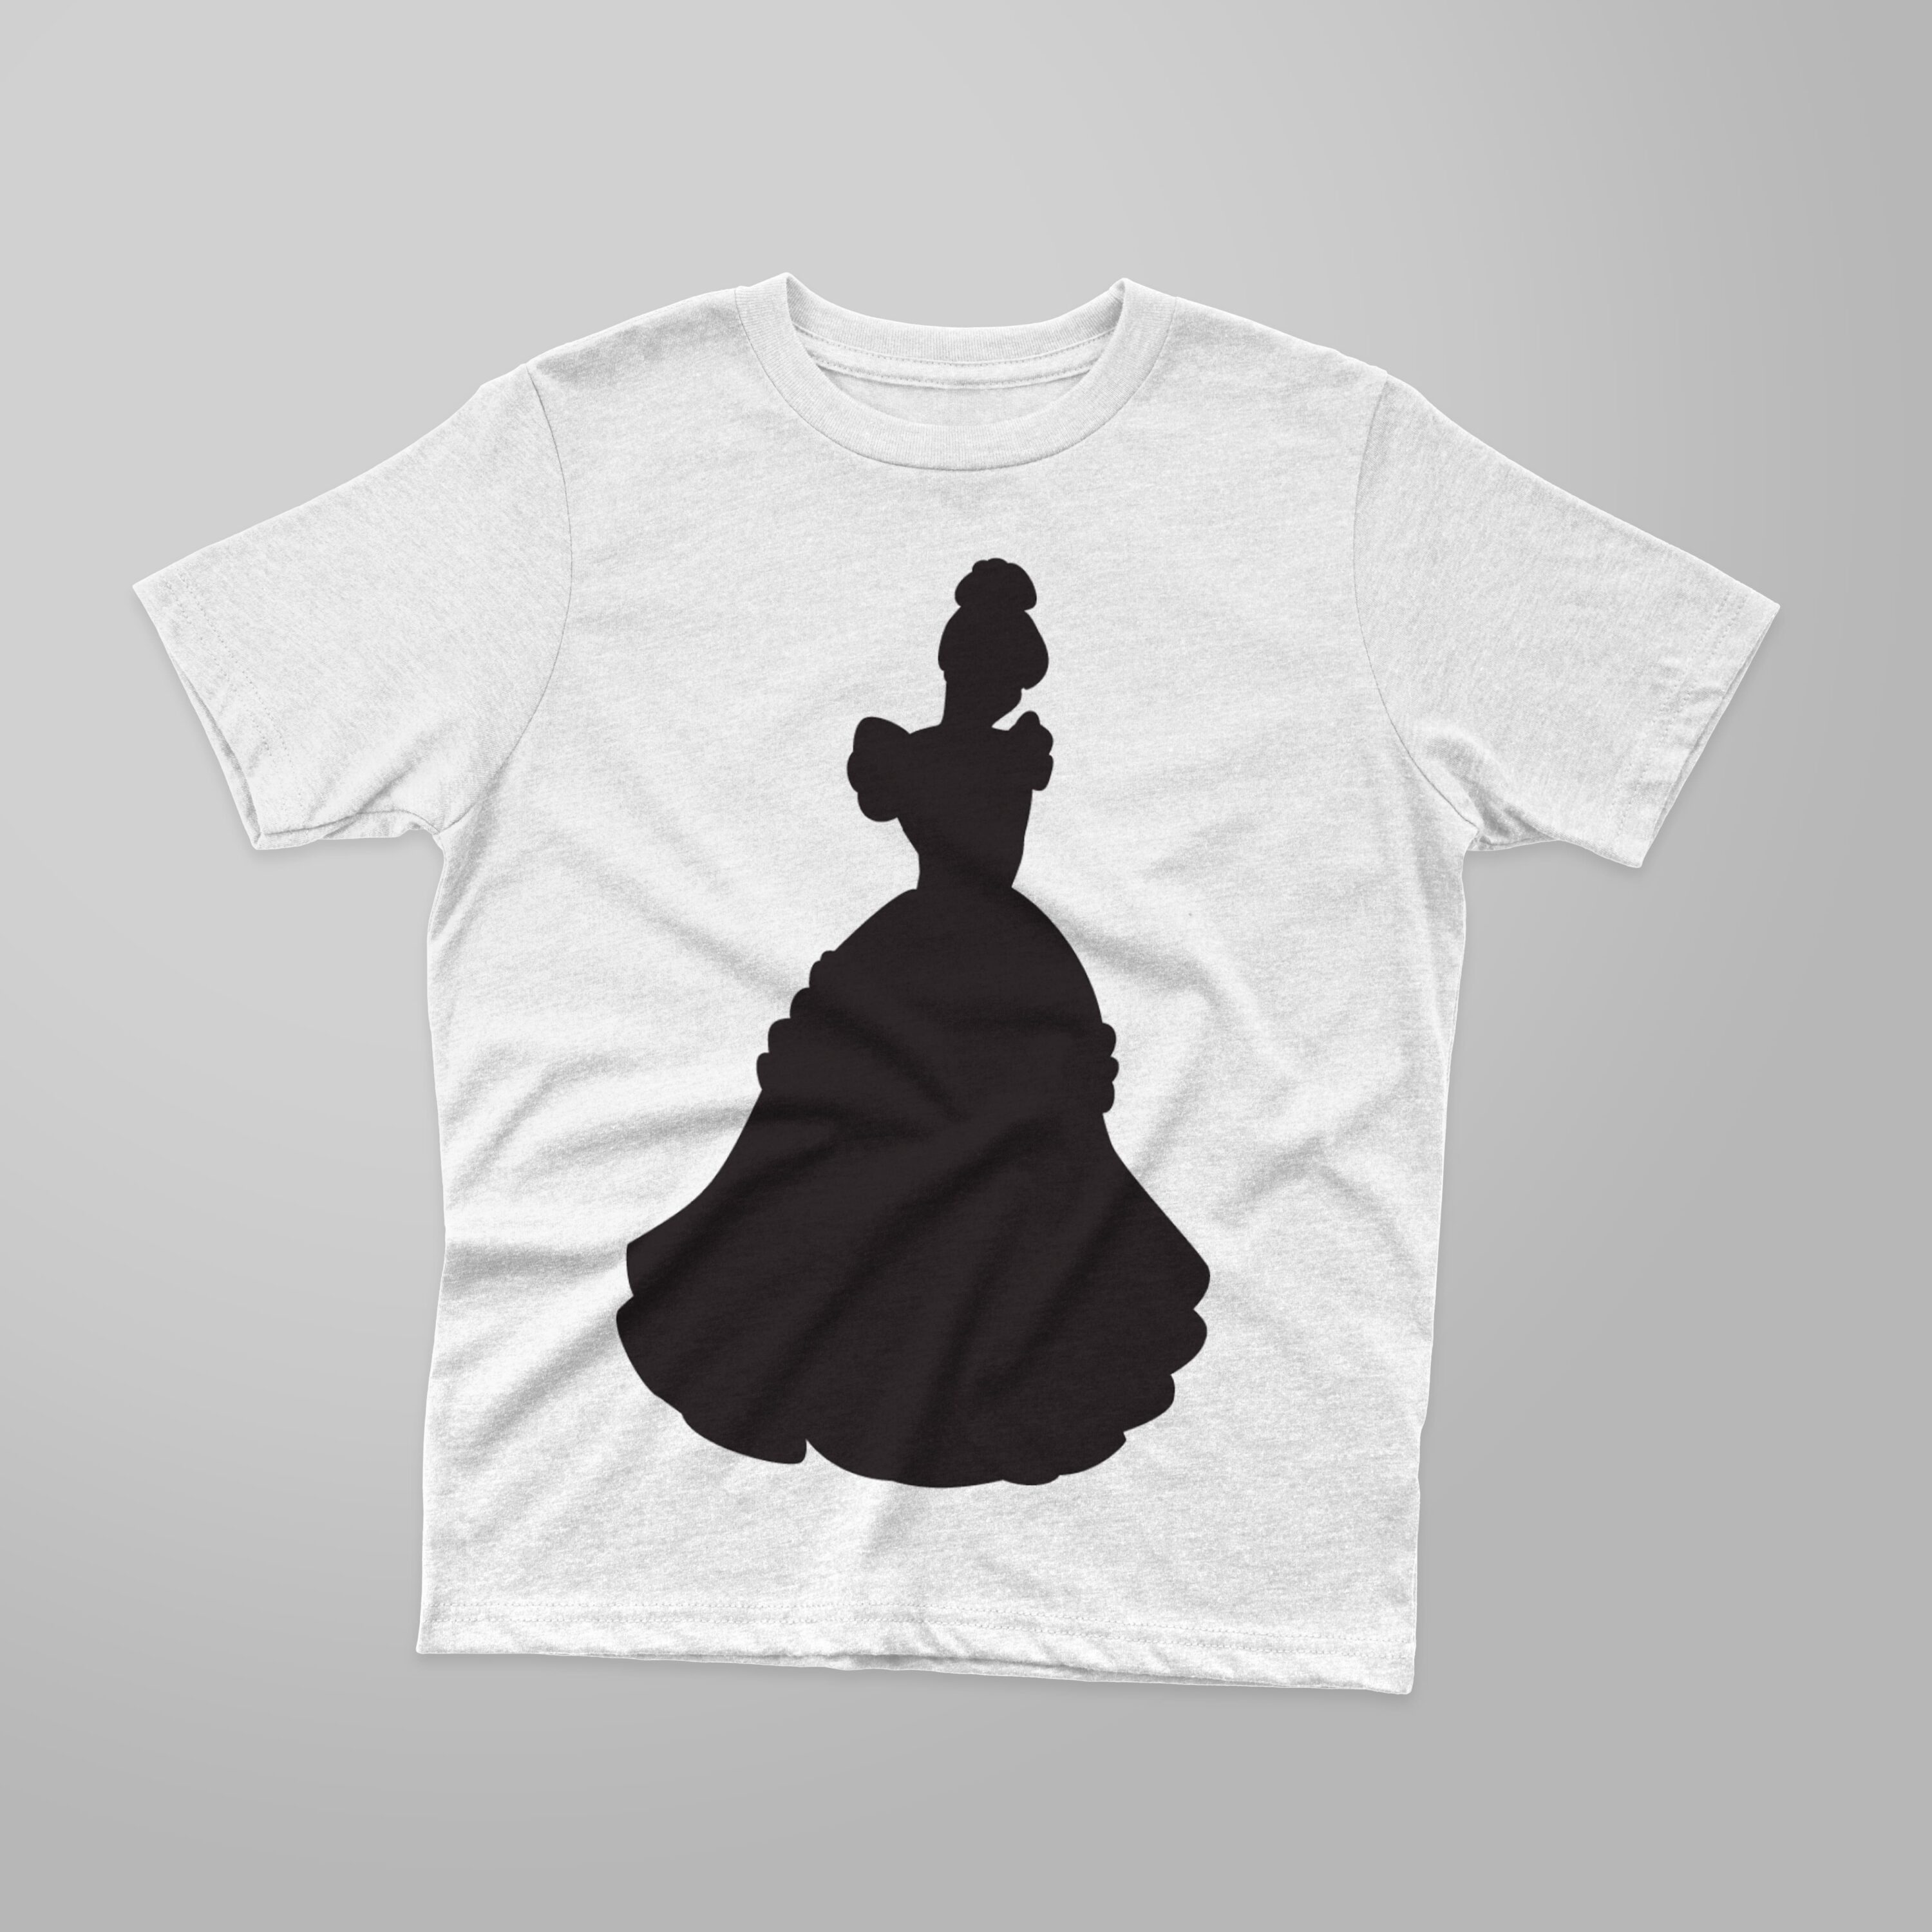 Image of a white t-shirt with an enchanting print of the Cinderella silhouette.